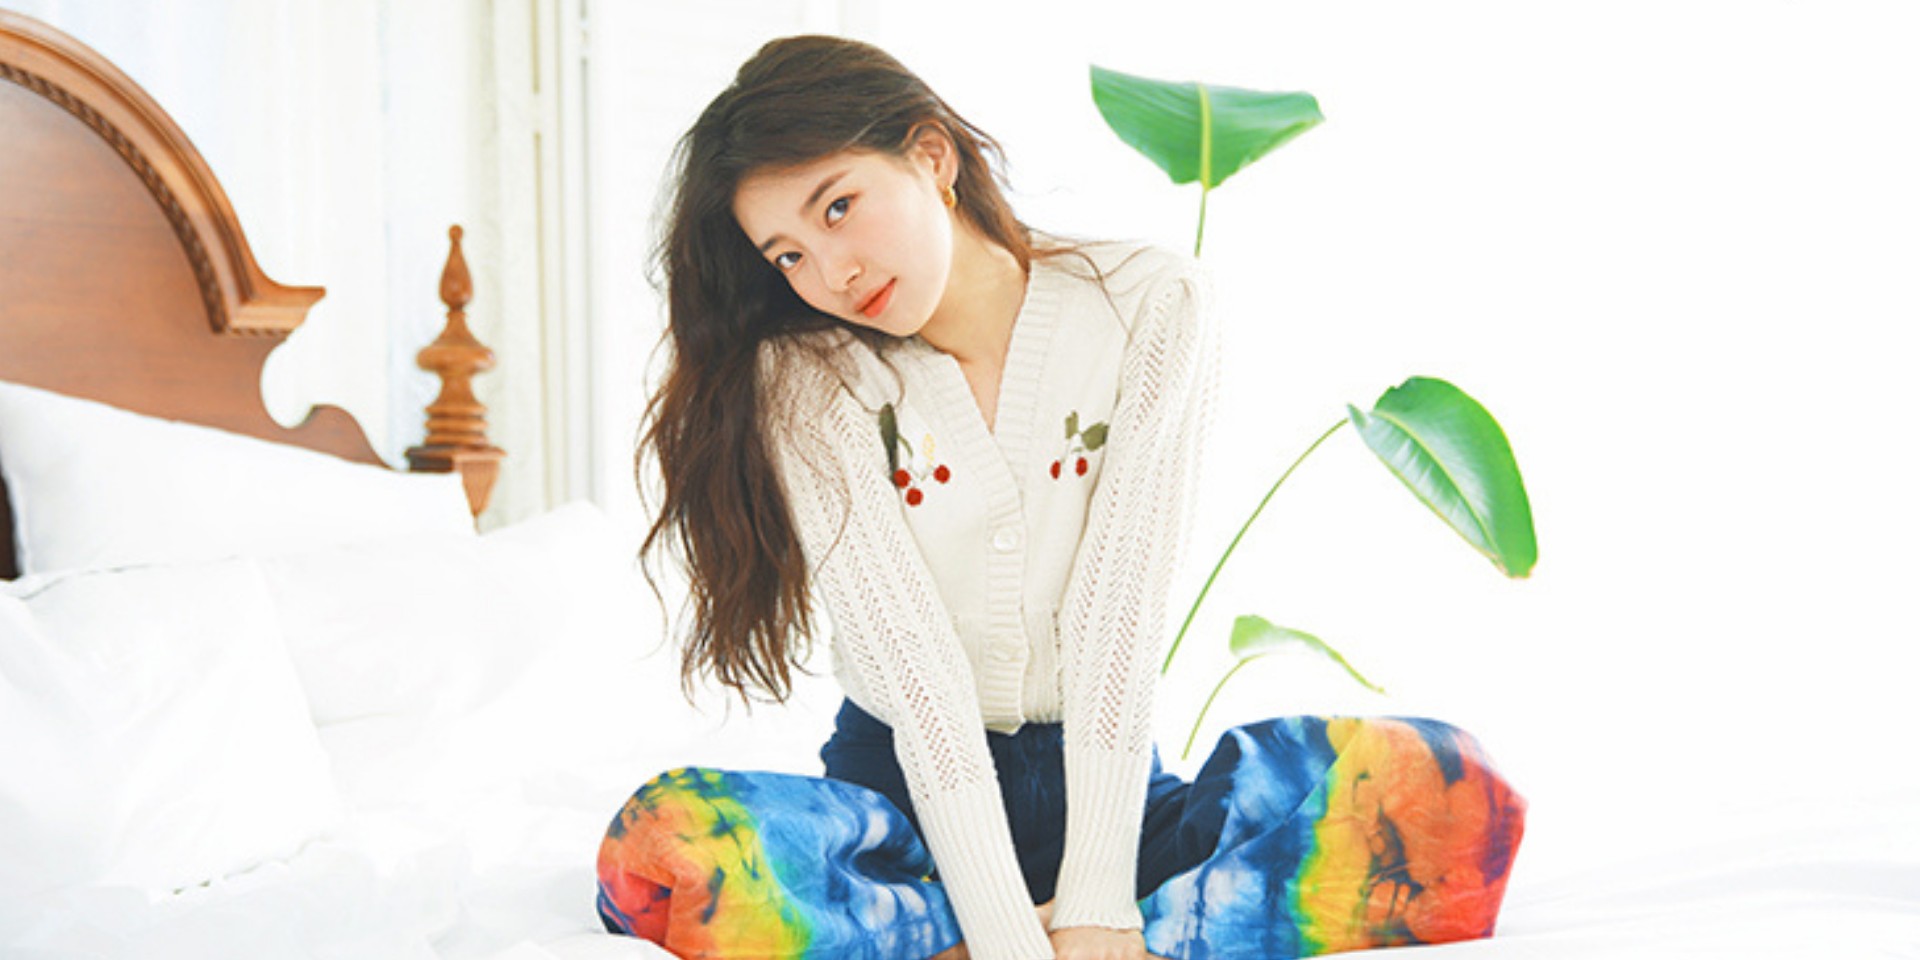 Suzy to "deliver joy in difficult times" at her 10th Anniversary celebration online concert